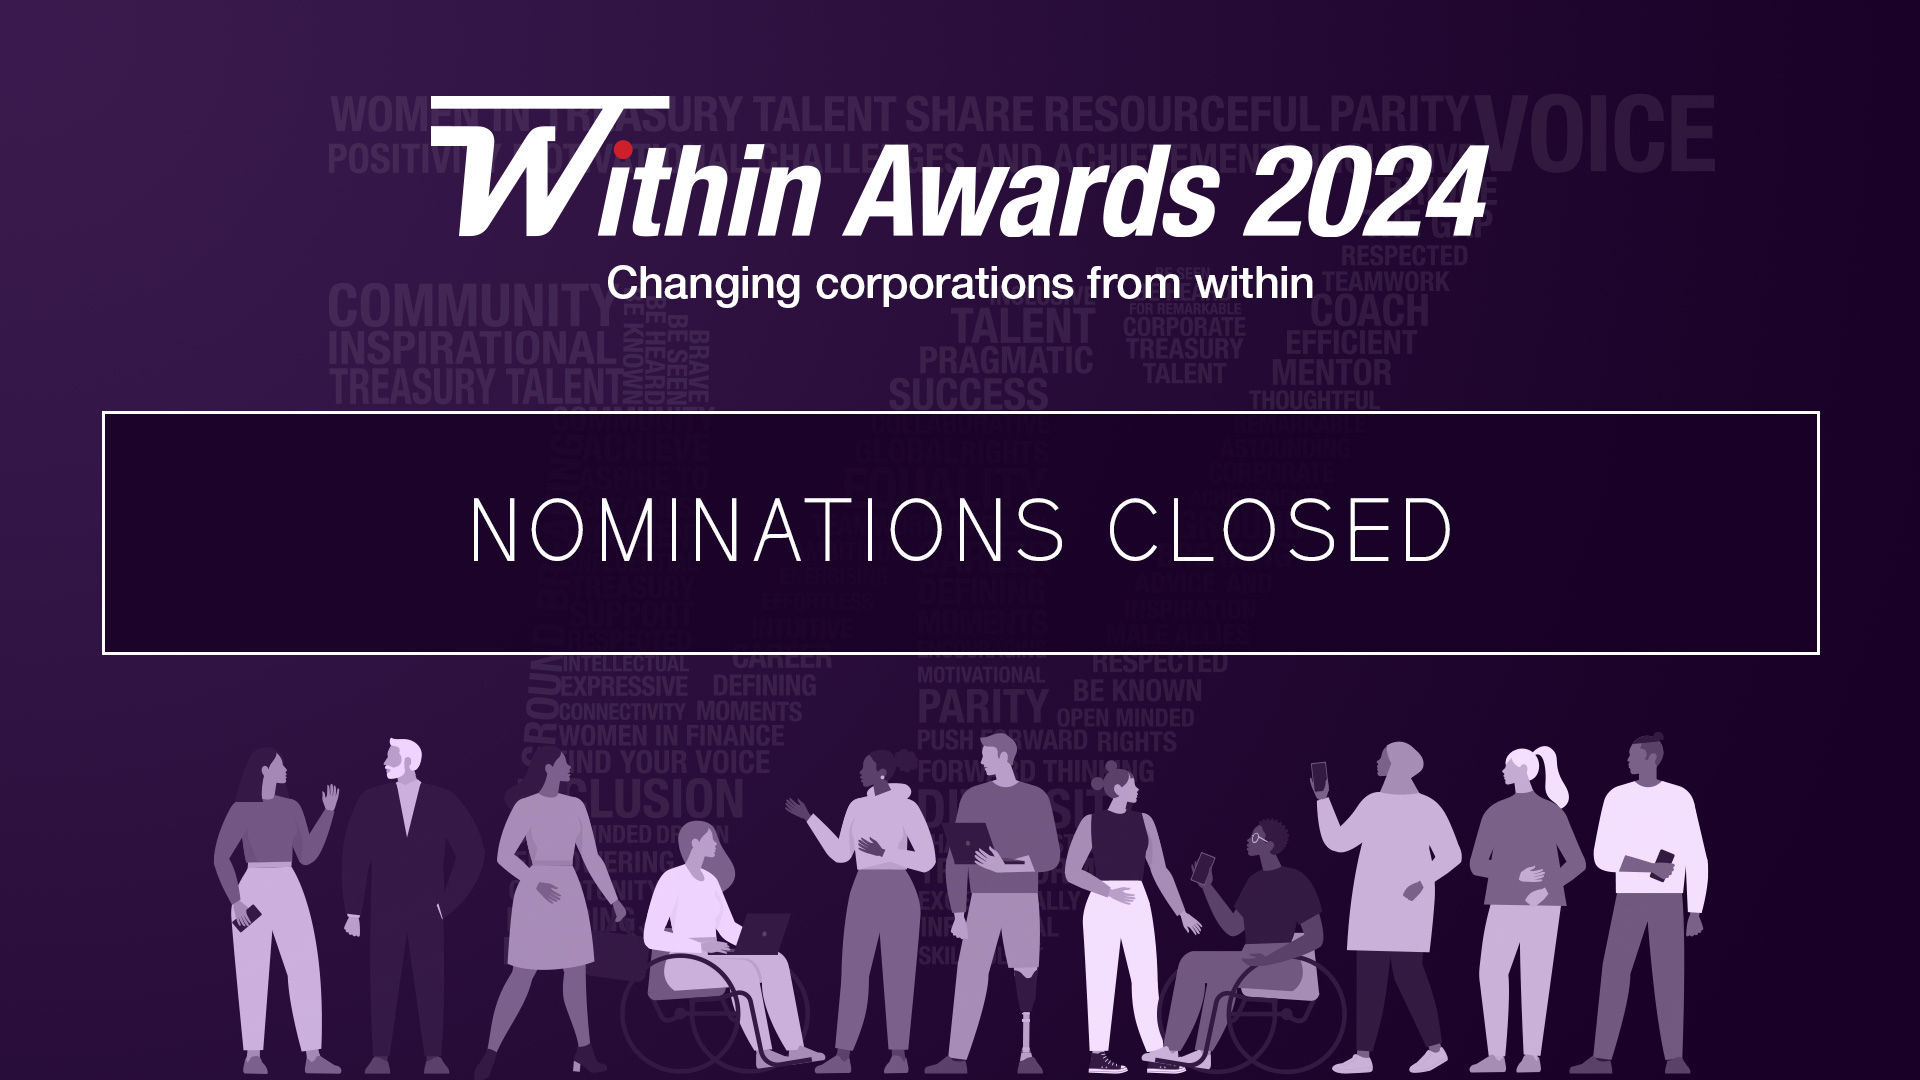 Within Awards 2024 nominations closed